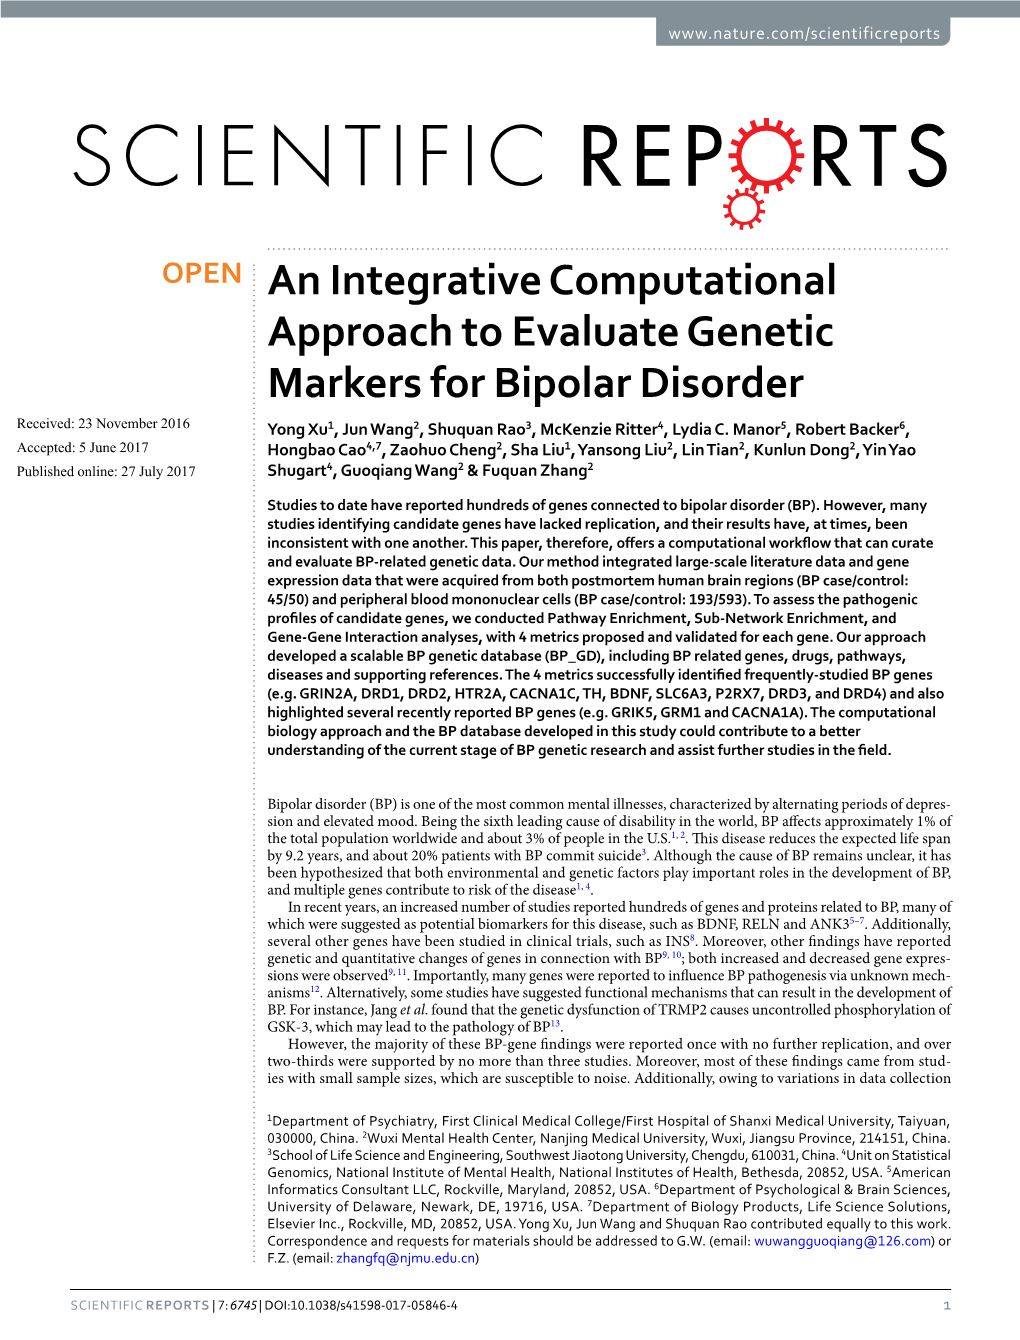 An Integrative Computational Approach to Evaluate Genetic